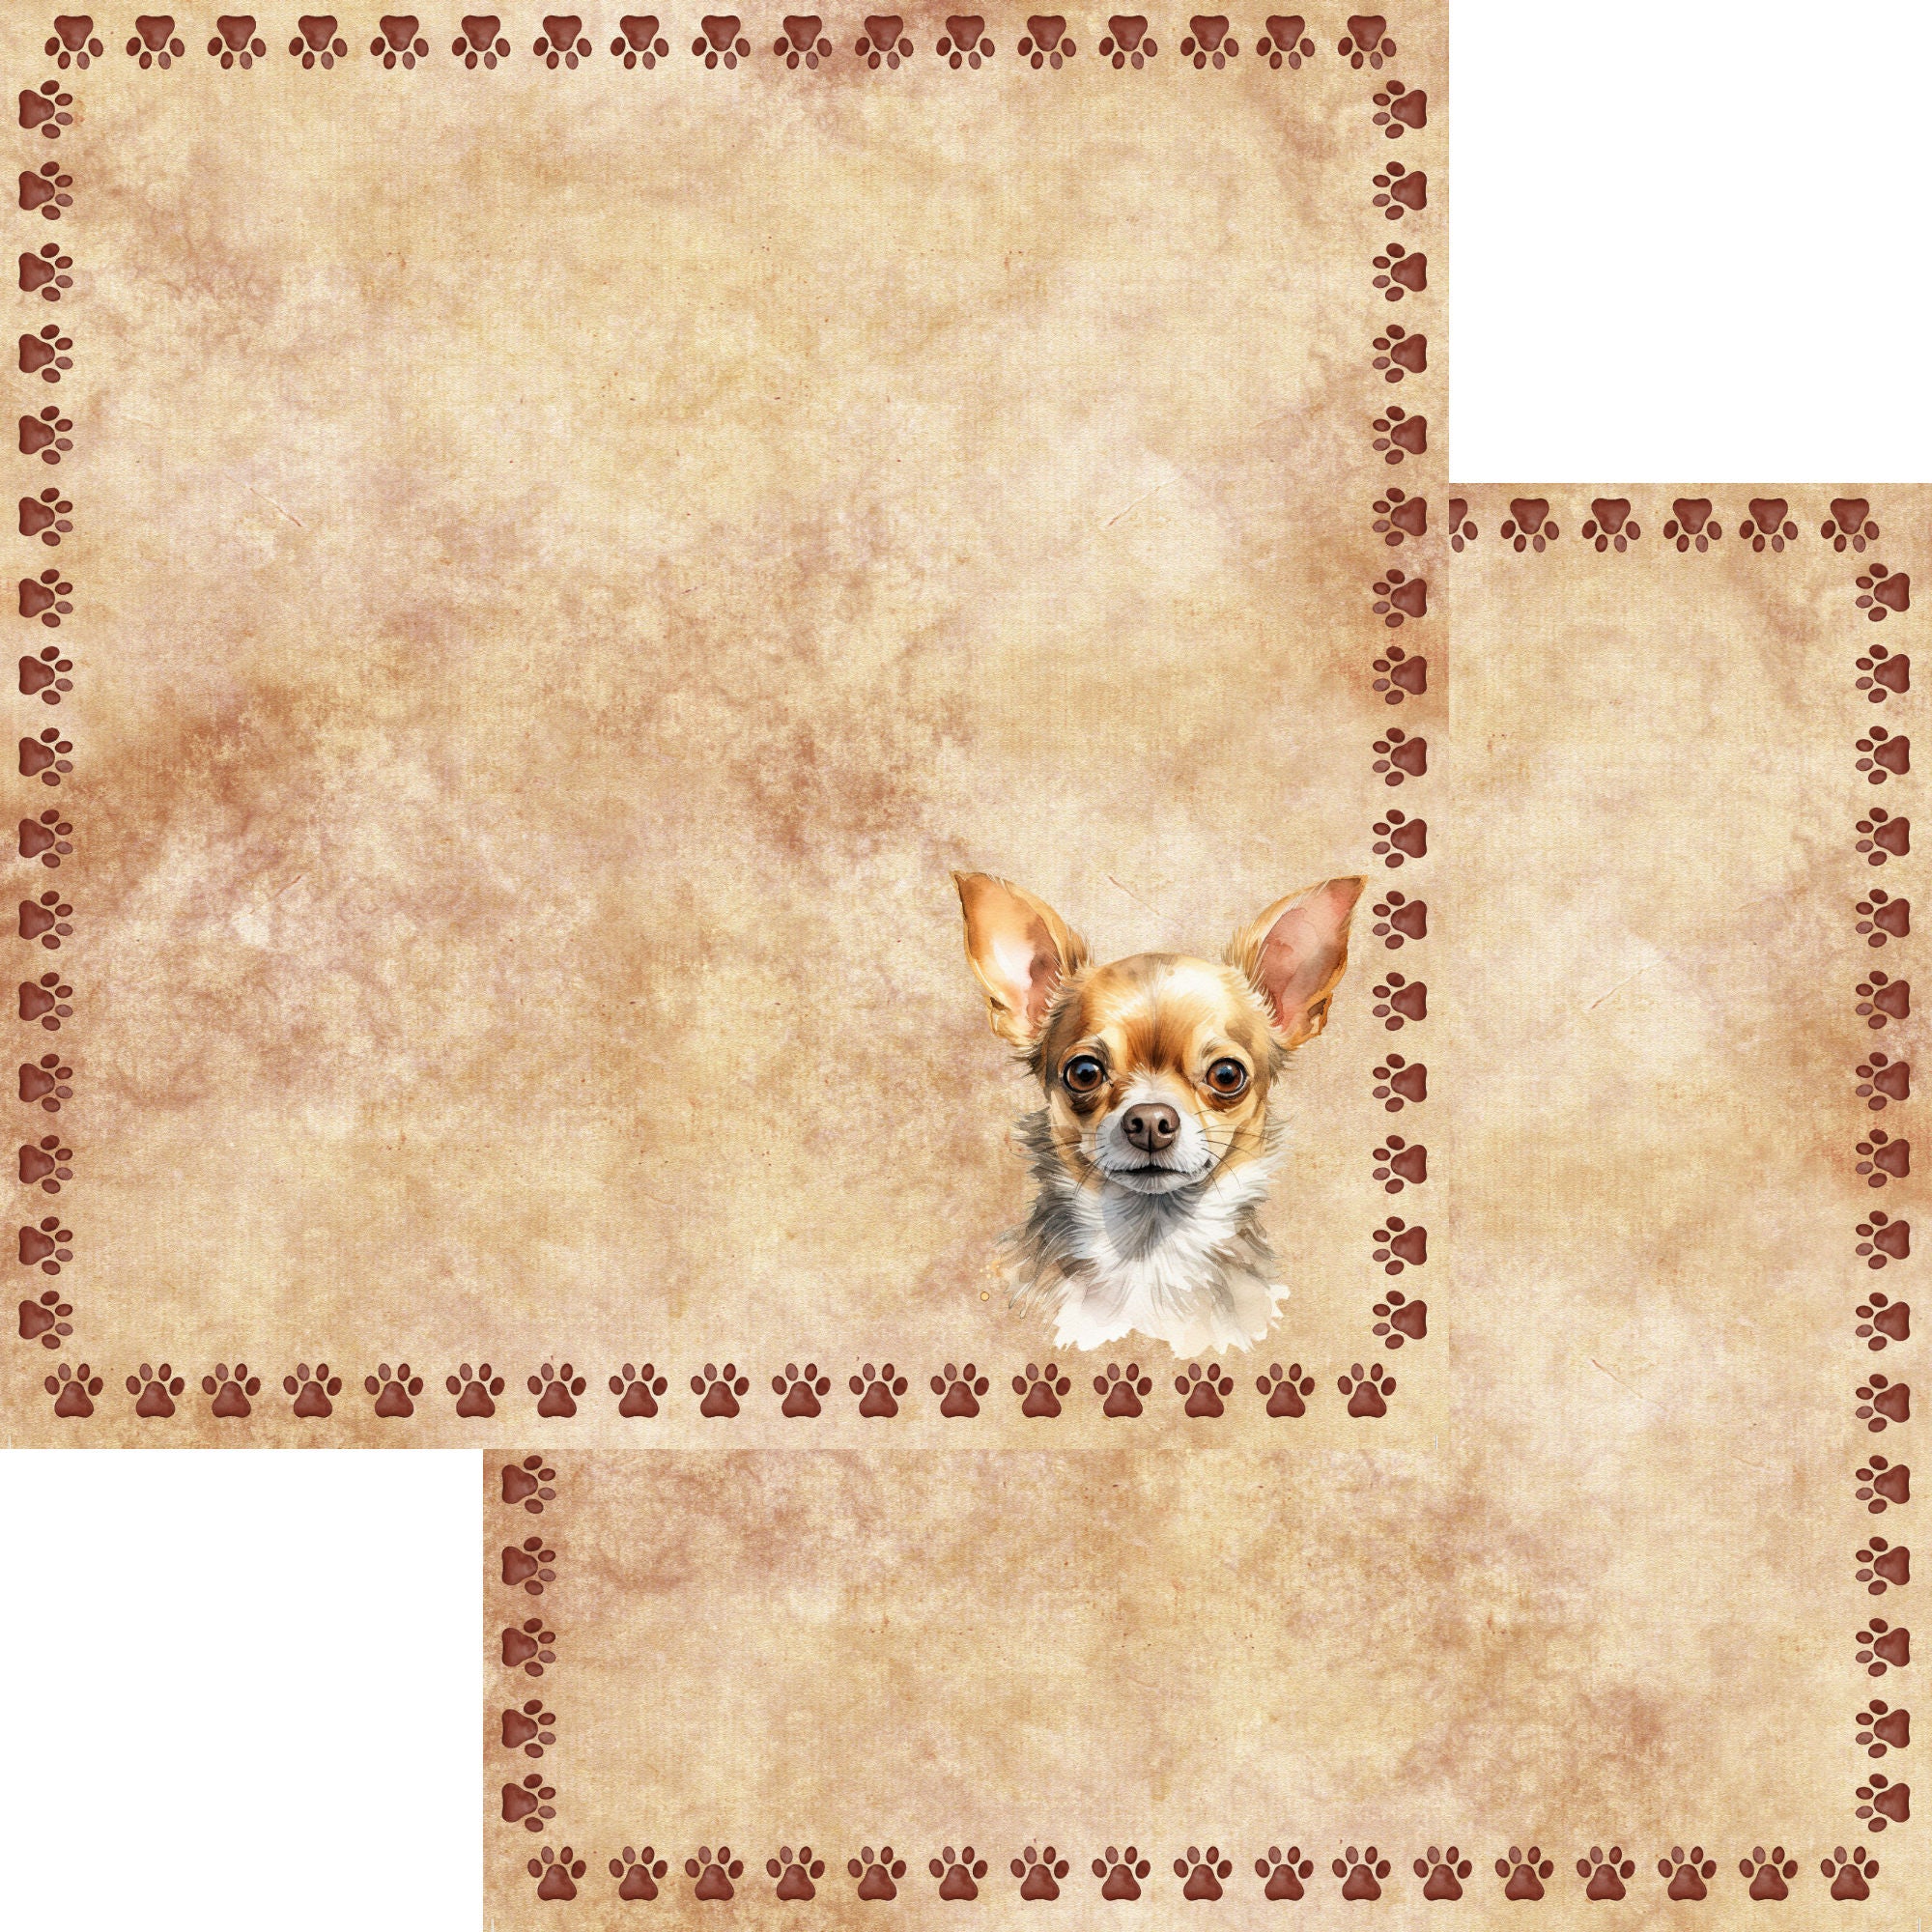 Dog Breeds Collection Chihuaha 12 x 12 Double-Sided Scrapbook Paper by SSC Designs